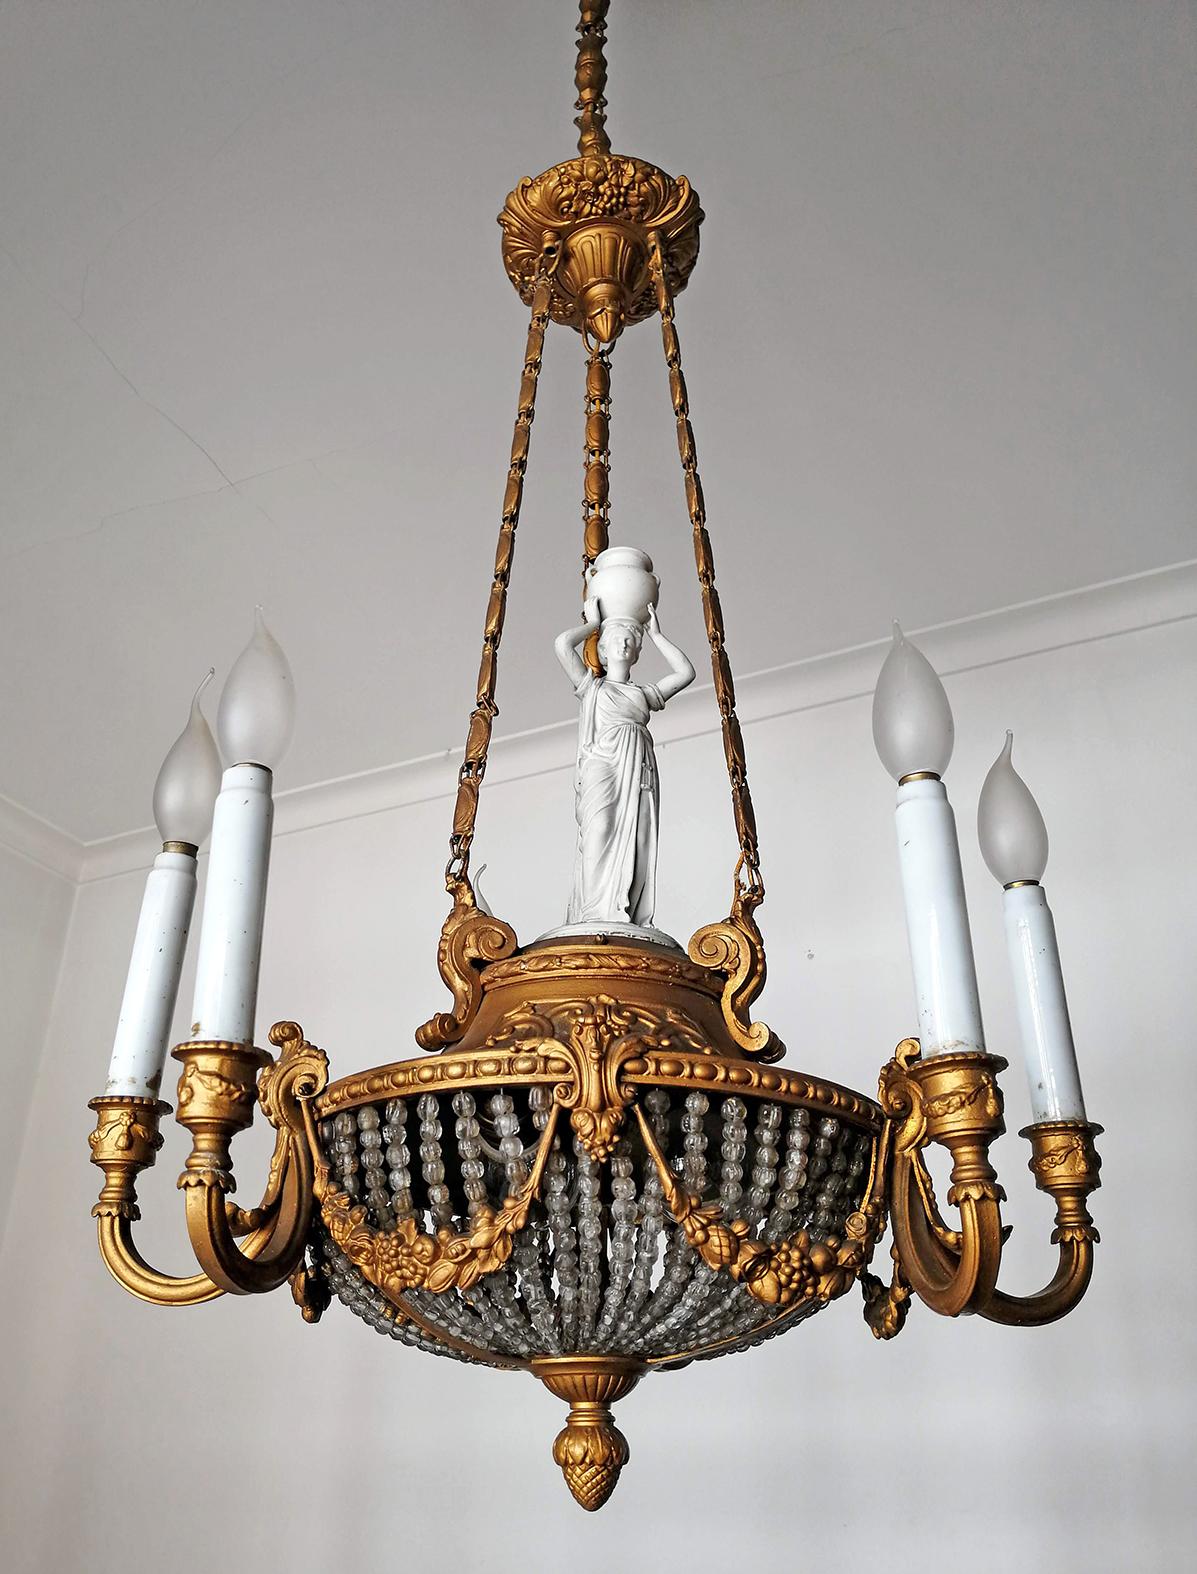 19th Century French Art Nouveau Empire Caryatid, Gilt Bronze & Beaded Chandelier In Good Condition For Sale In Coimbra, PT